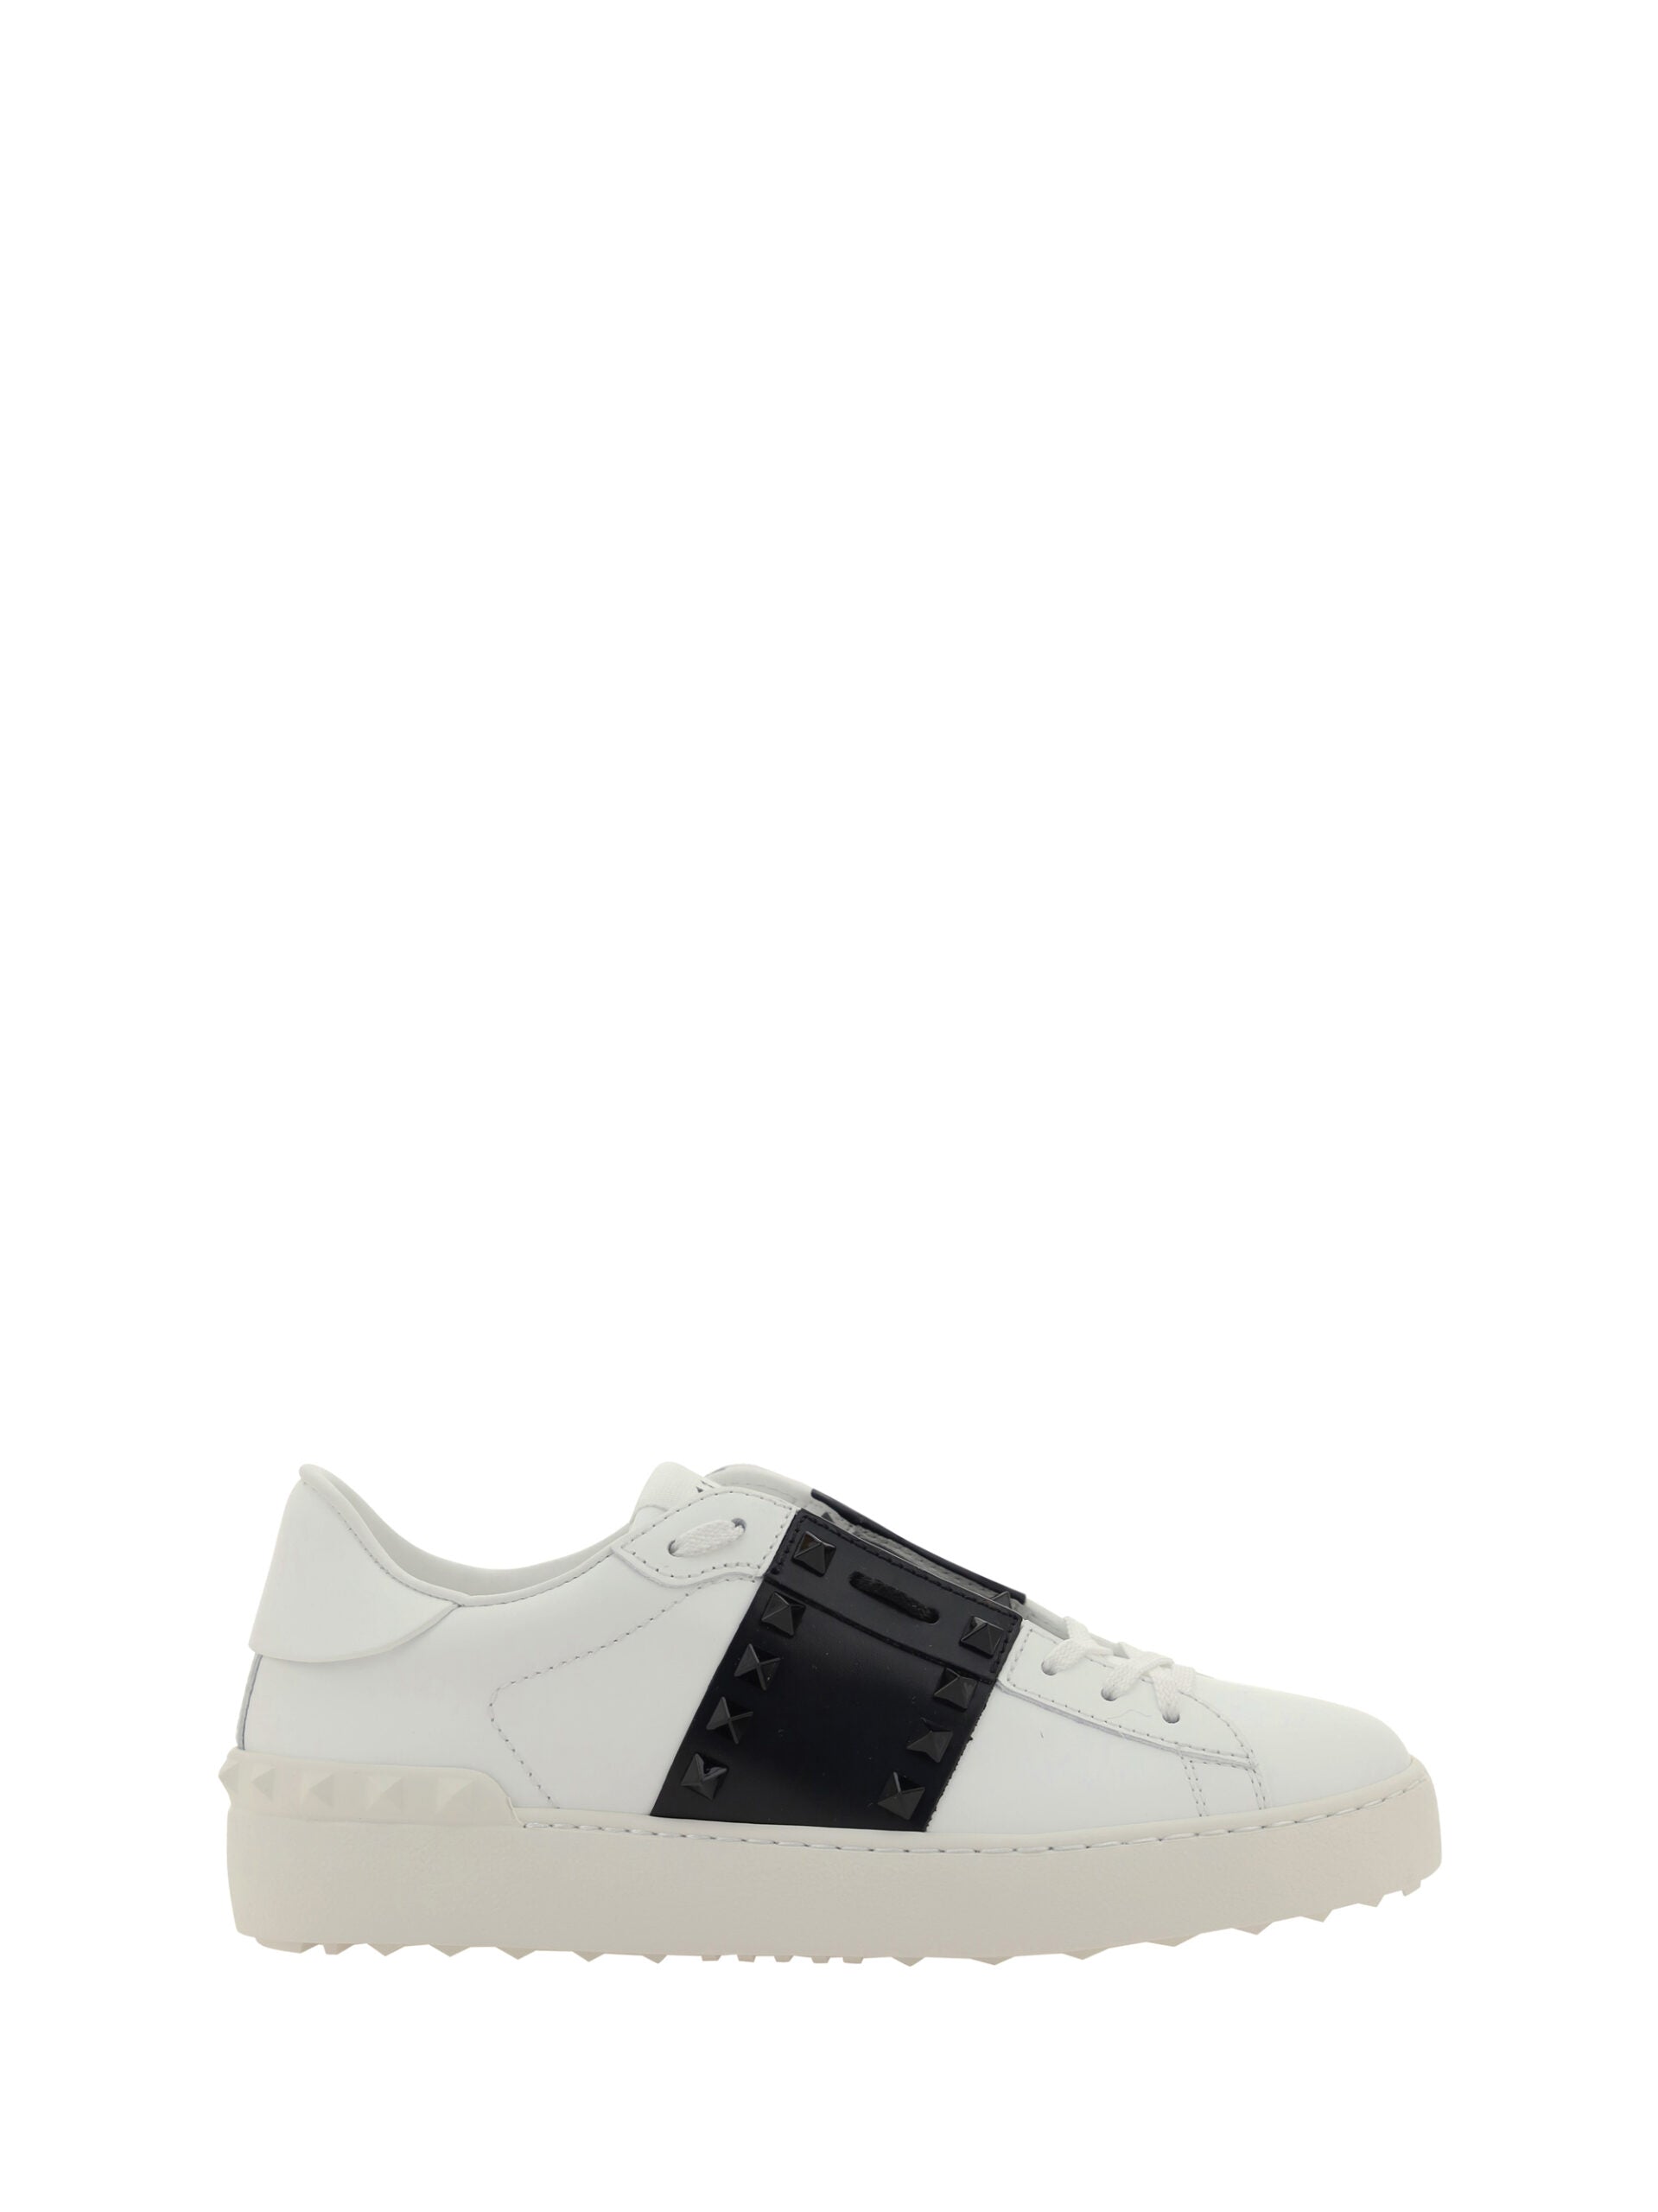 Valentino White and Black Calf Leather Sneakers - clever alice